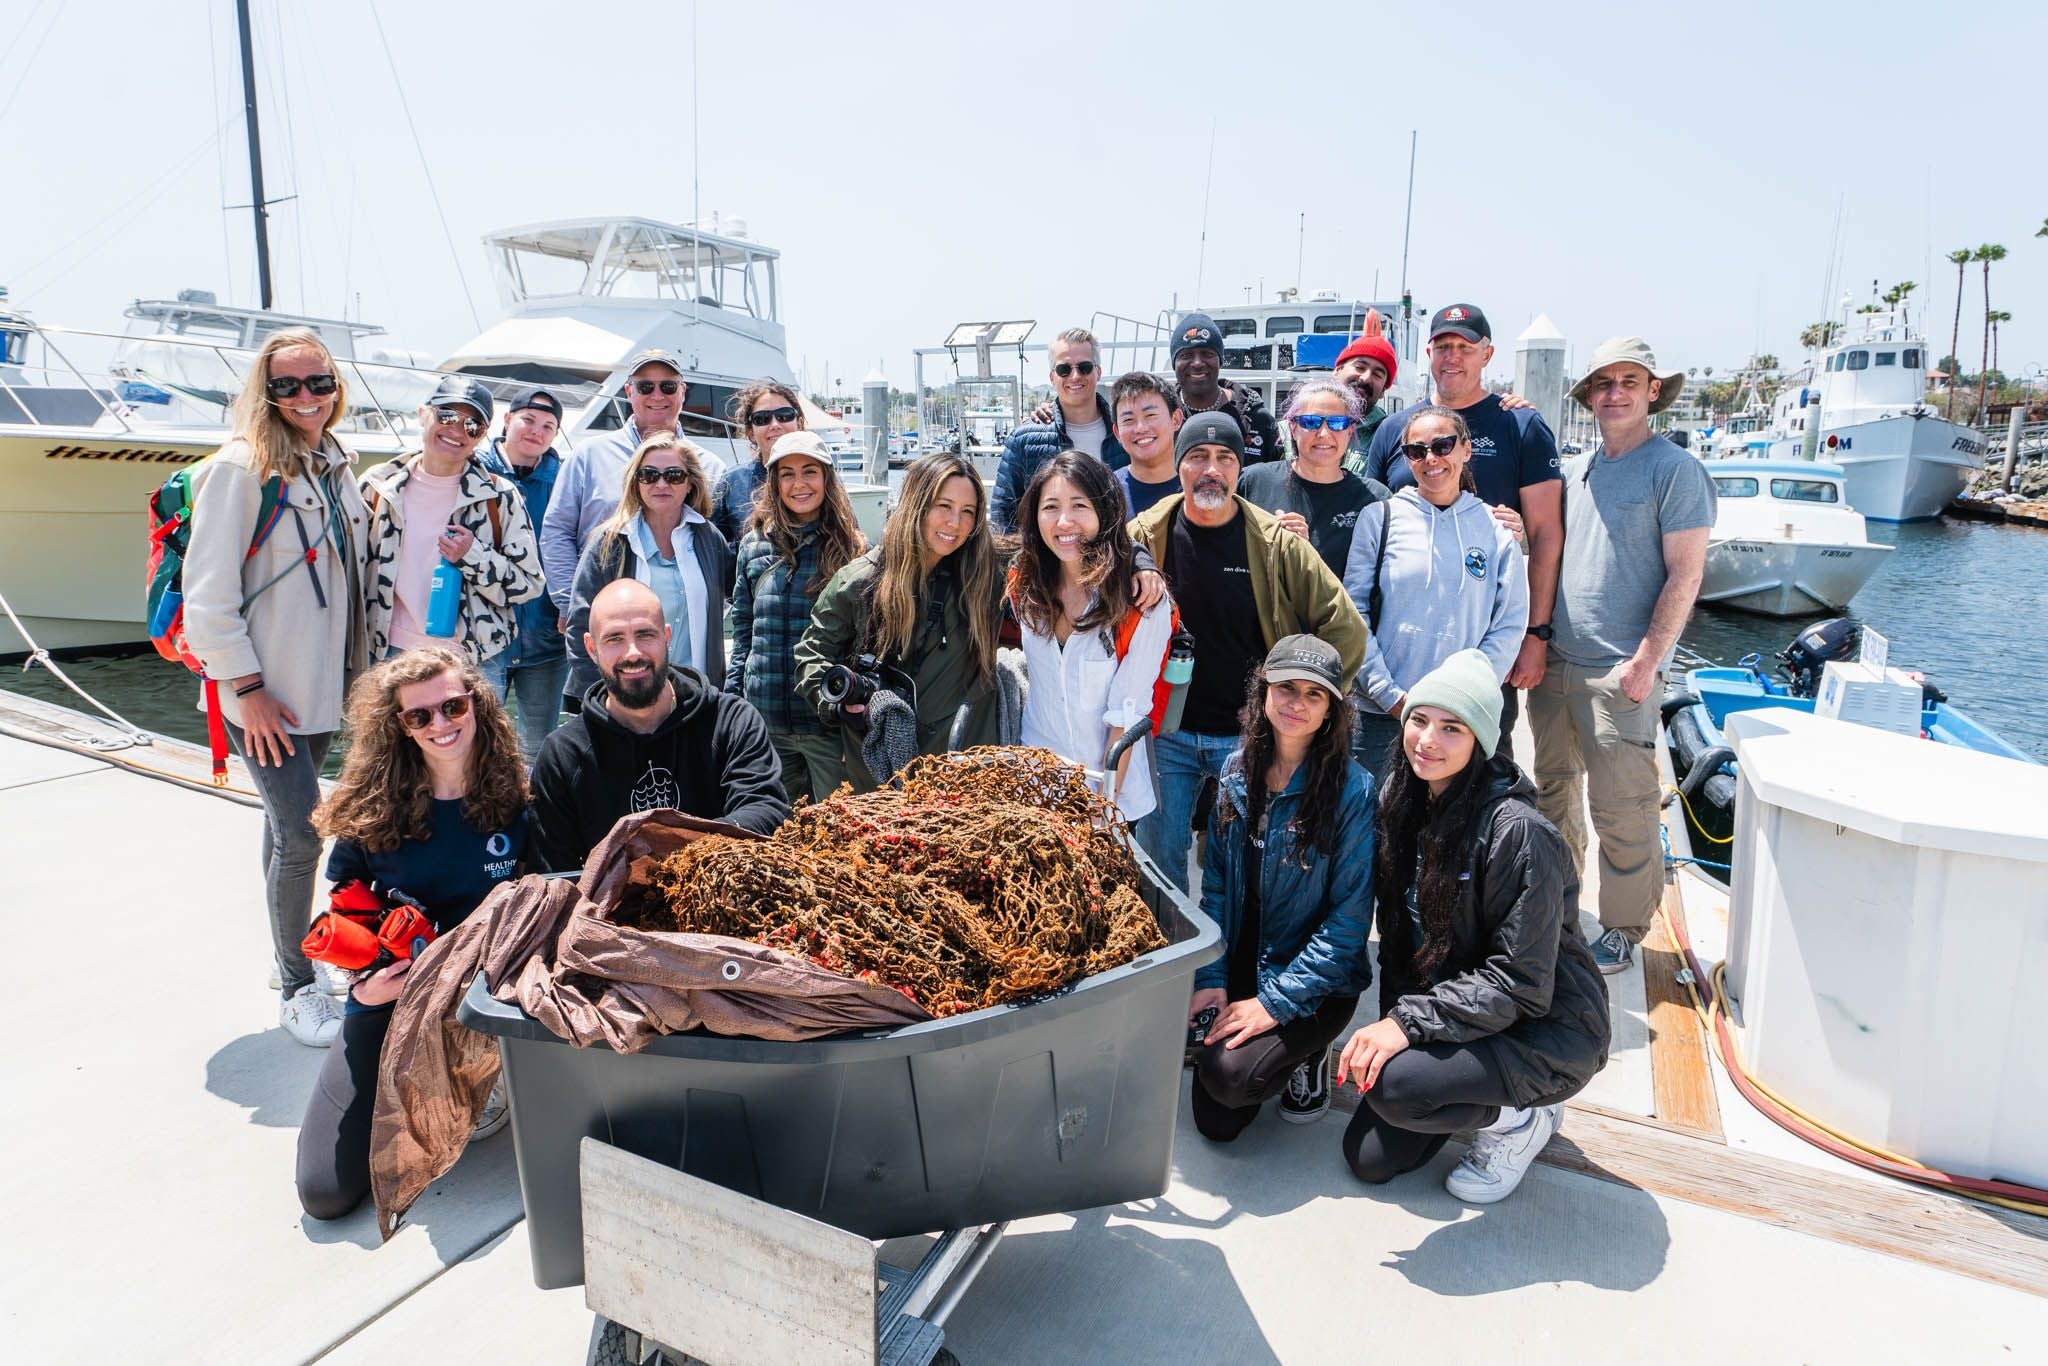 Healthy Seas, Ghost Diving USA & Partners at the dock in San Pedro after a successful mission removing ghost fishing nets. Photo Credit: Sean Farkas